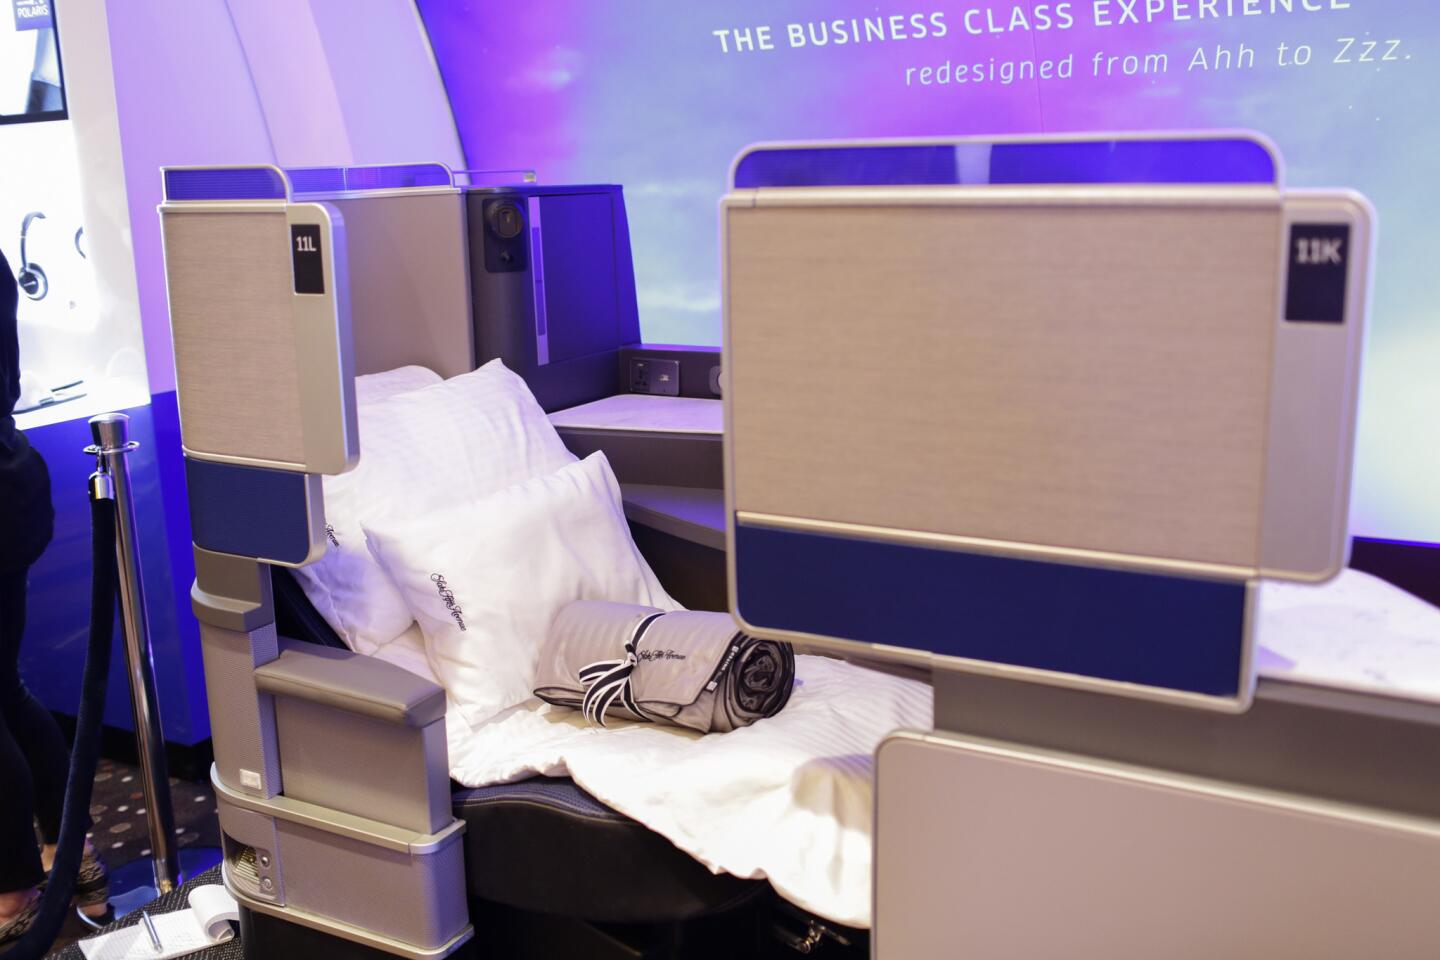 The new 6-foot-long sleep pods/seats for Polaris, United Airlines' new international business class, was unveiled on June 16, 2016, in Chicago.